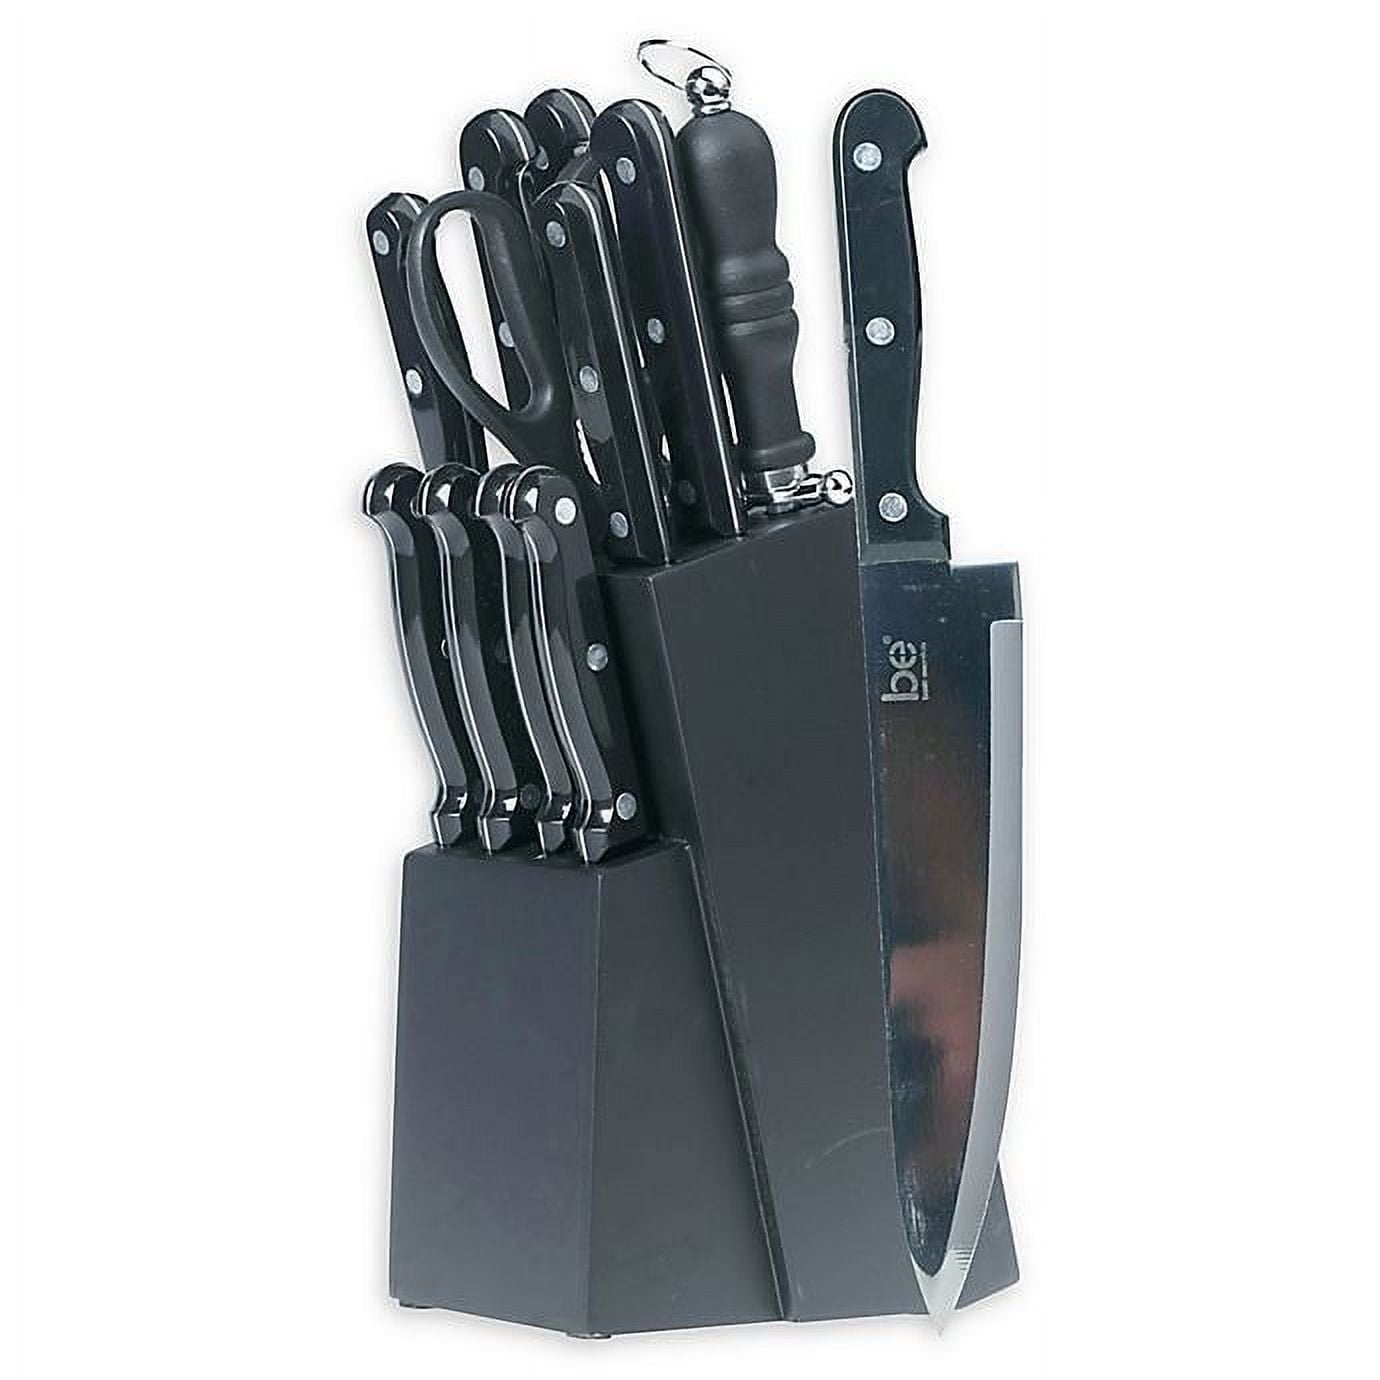   Basics Color-Coded Kitchen 12-Piece Knife Set, 6 Knives  with 6 Blade Guards, Multicolor, 13.88 x 4.13 x 1.38 inch: Home & Kitchen